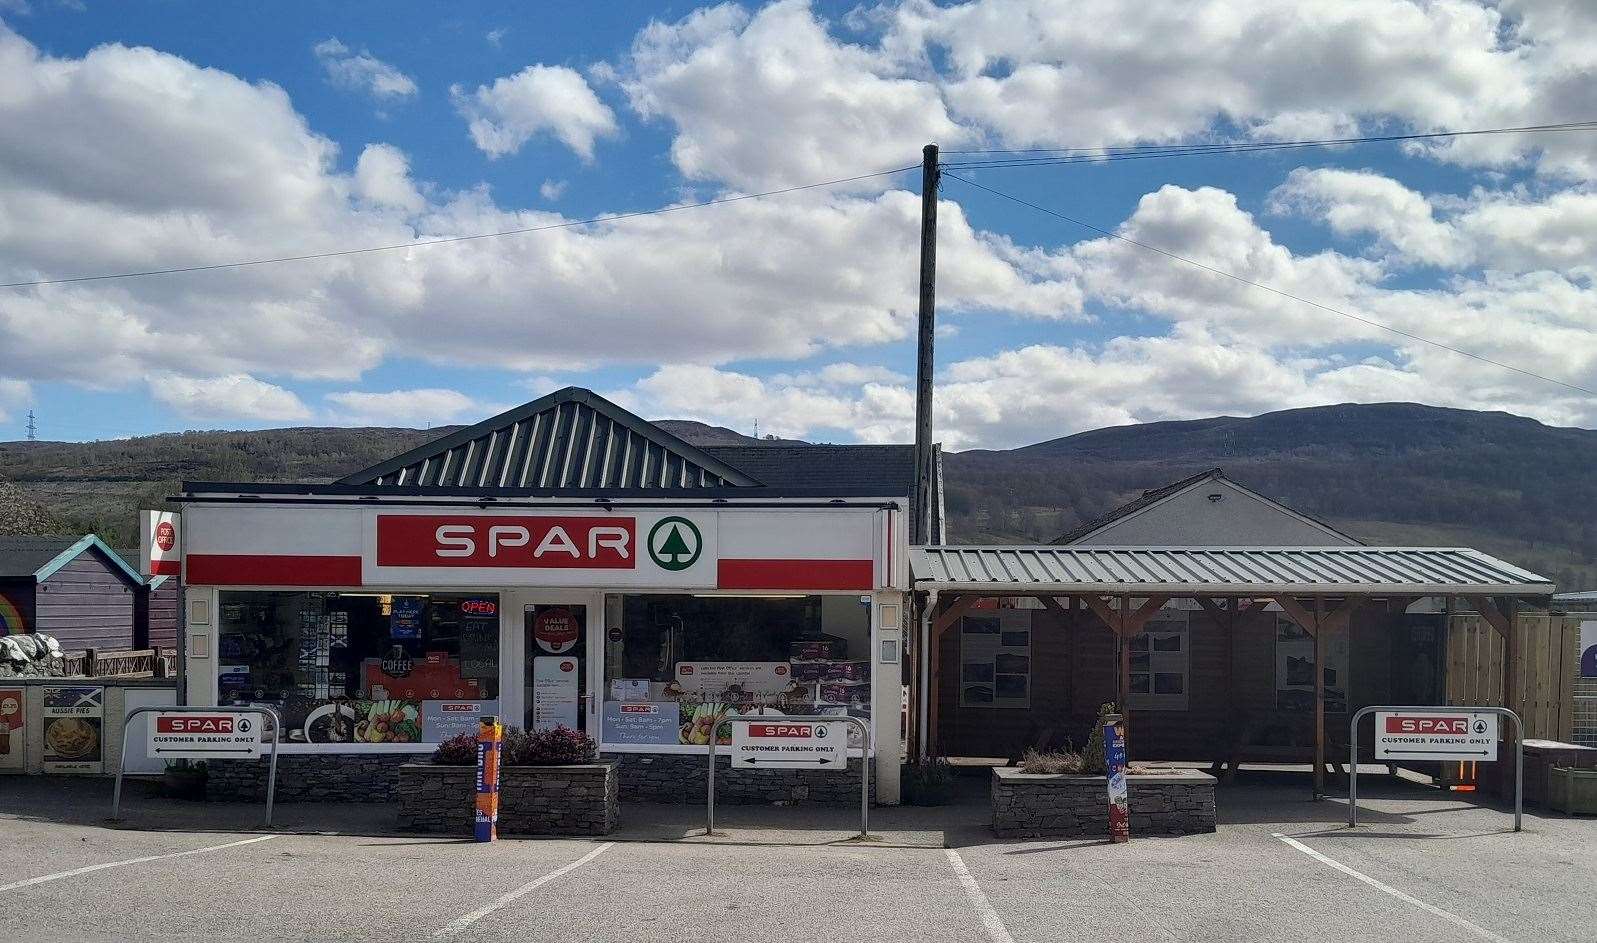 The Spar store in Cannich.